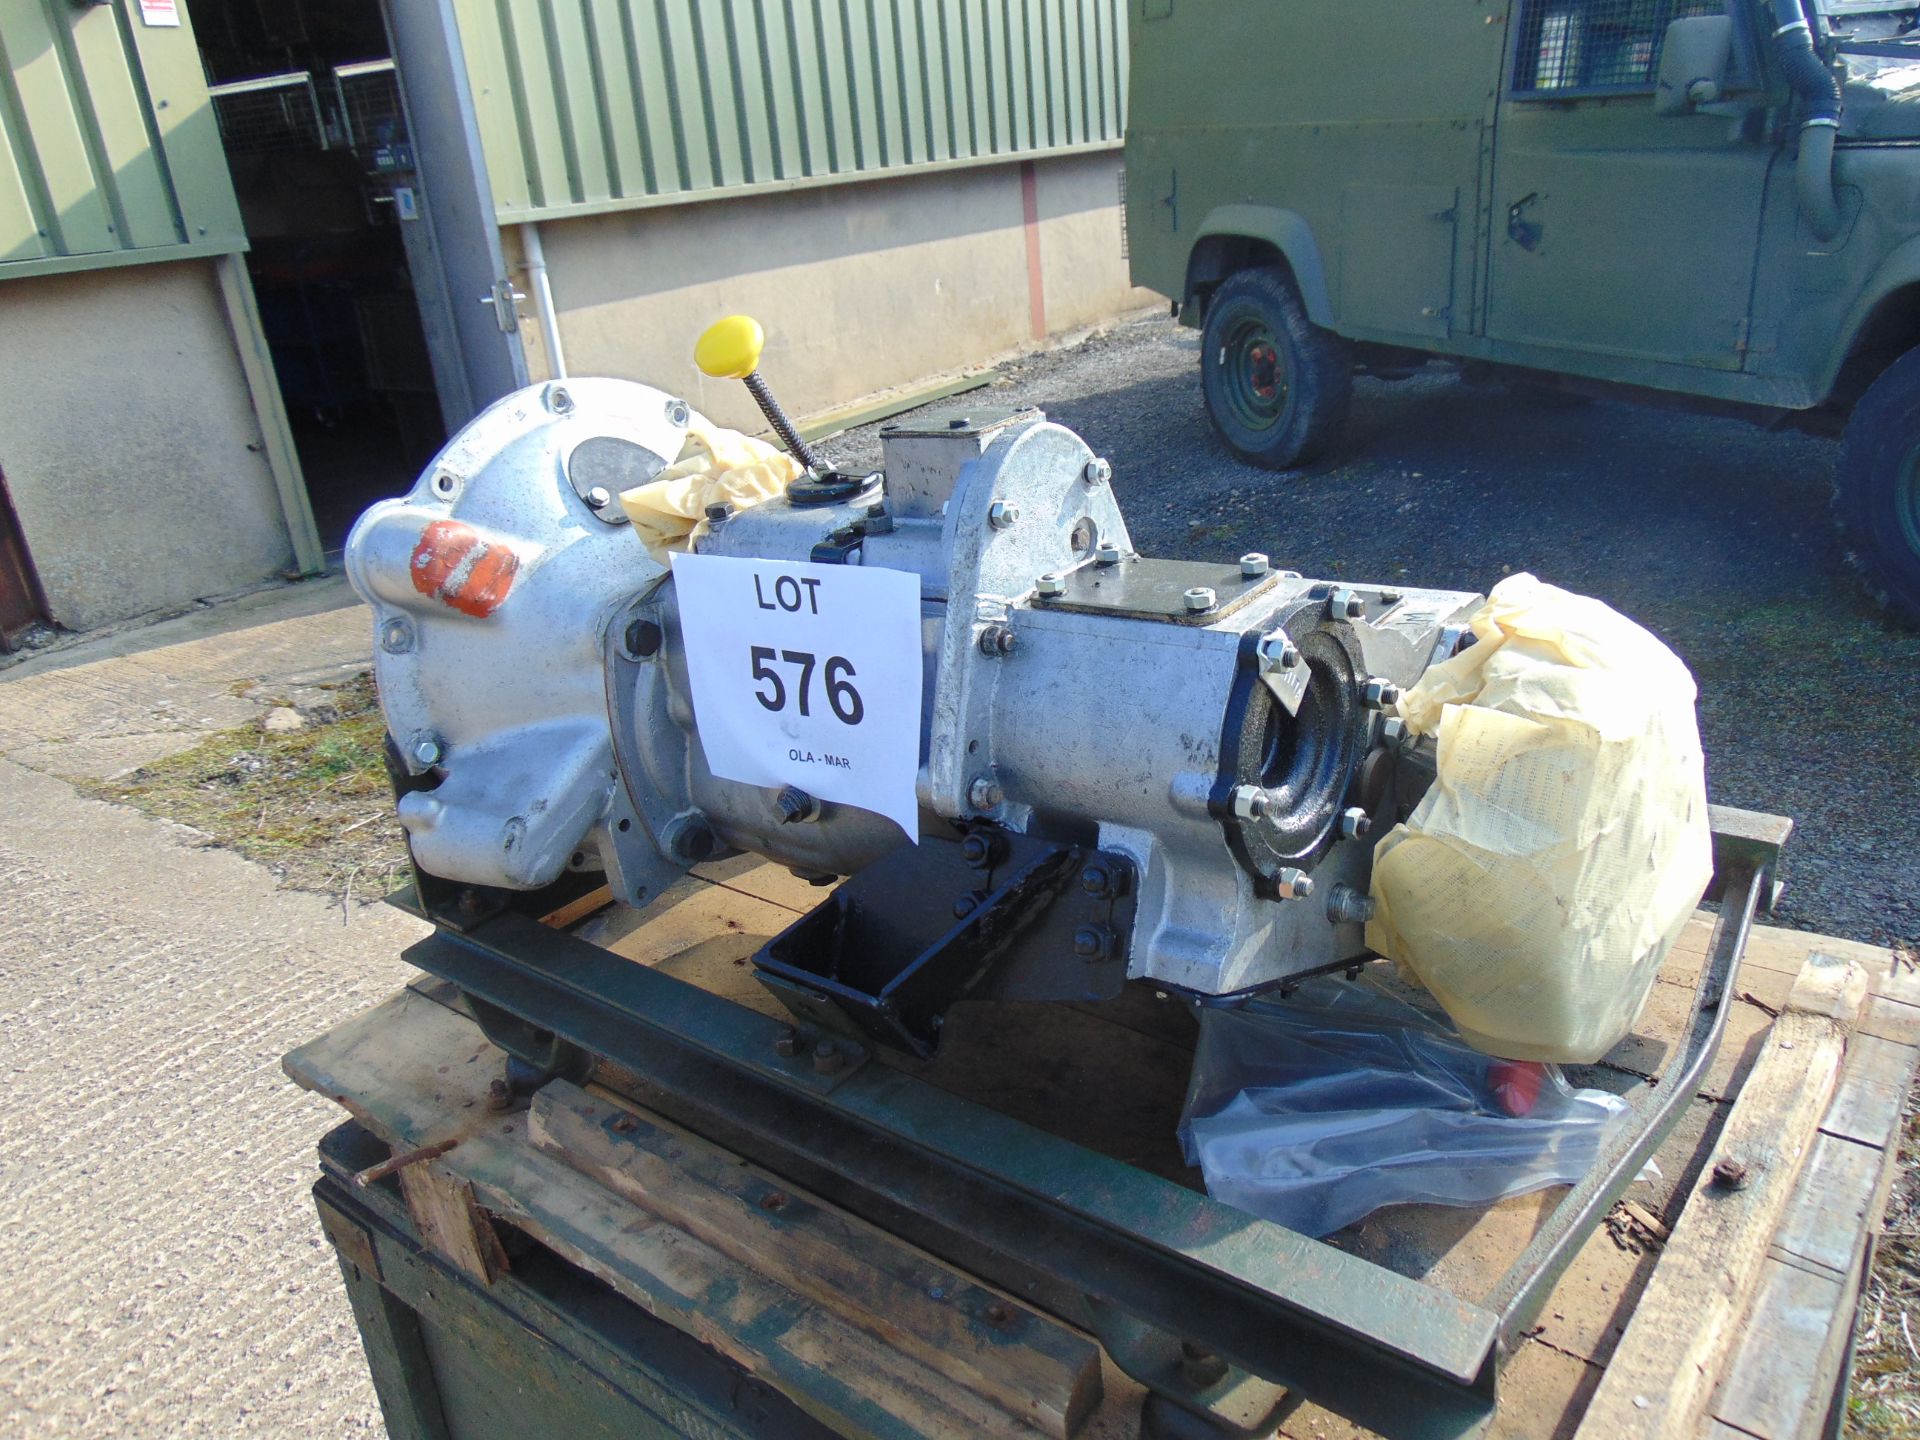 Army Recon Series Gearbox c/w Ancillaries as shown in Original Crate